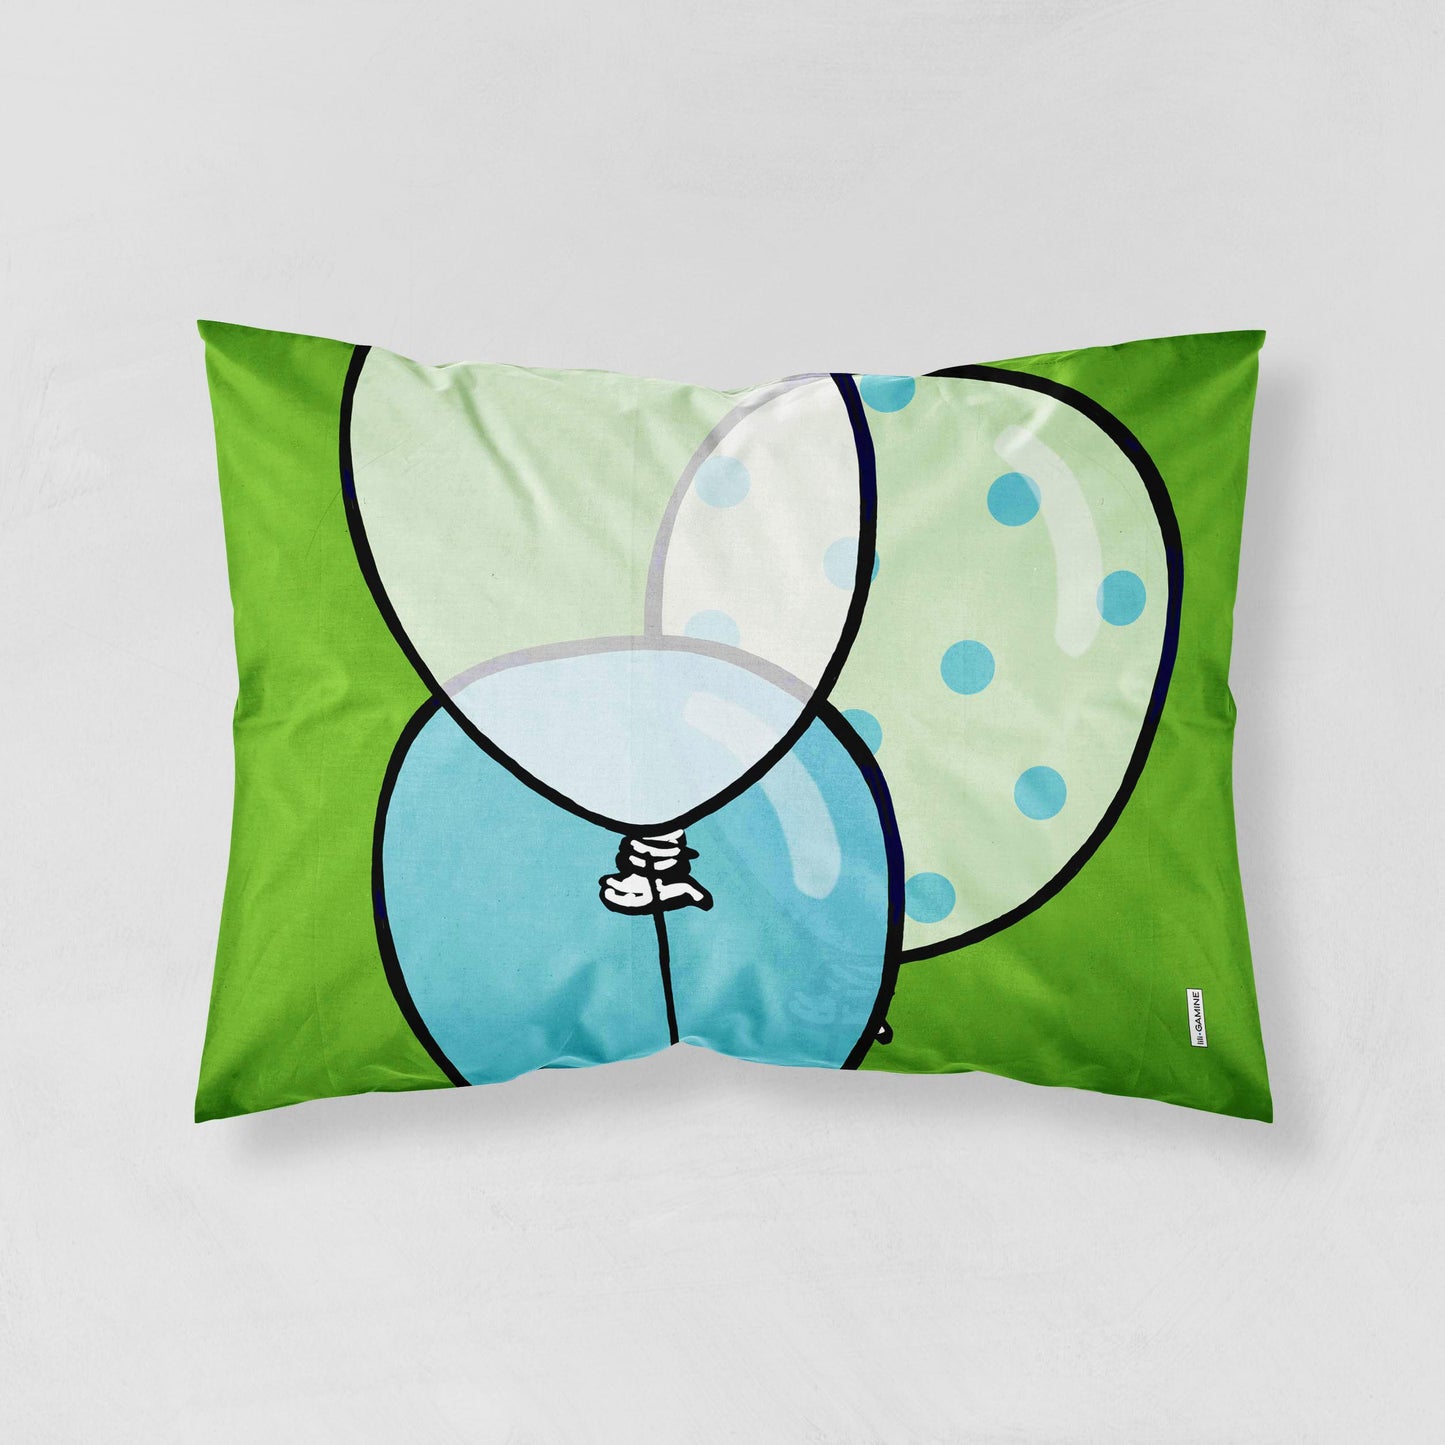 Illustrative Balloons on a Pillow Cover by Lili Gamine